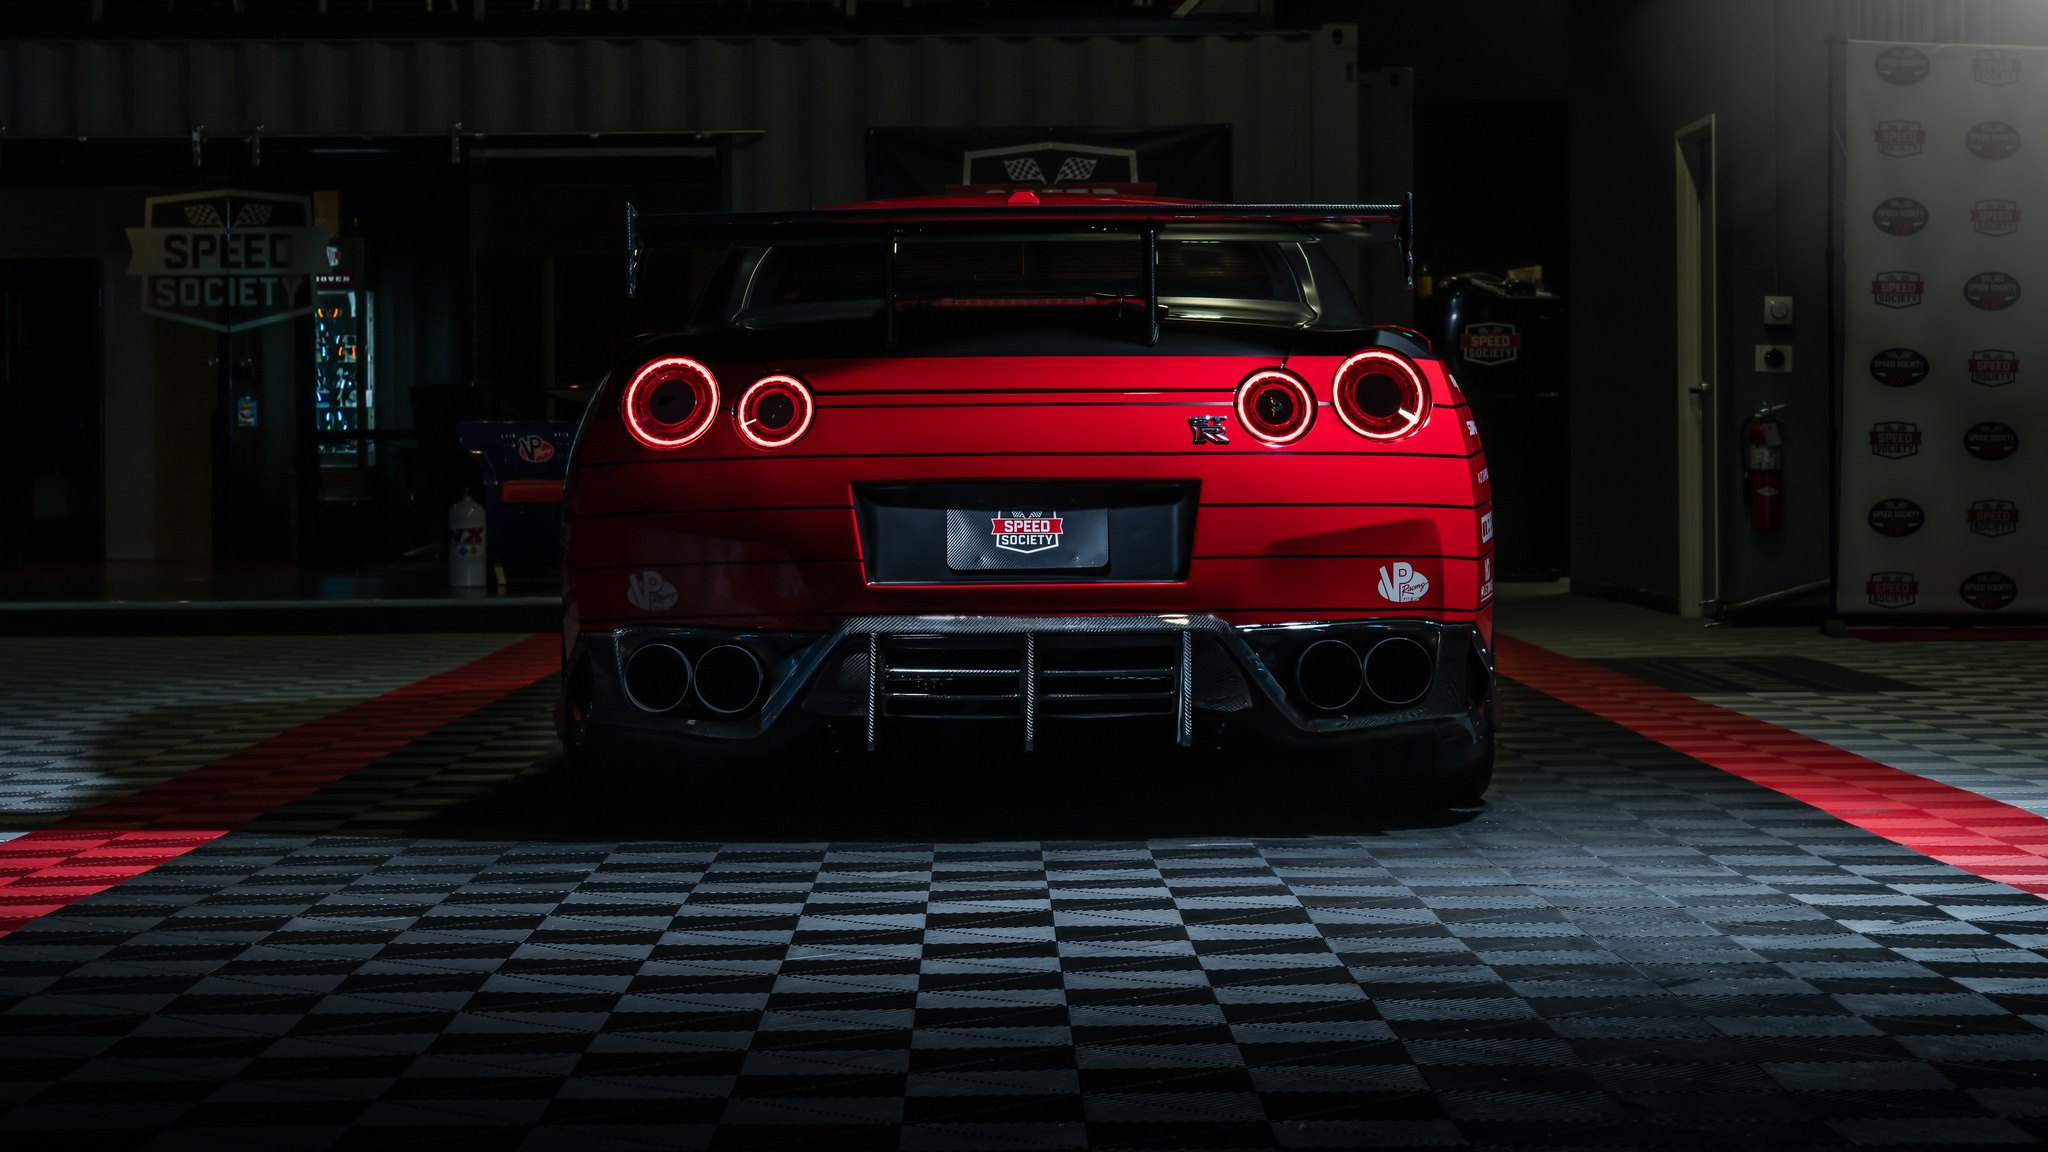 Custom Halo Taillights on Race Inspired Nissan GT-R - Photo by HRE Wheels